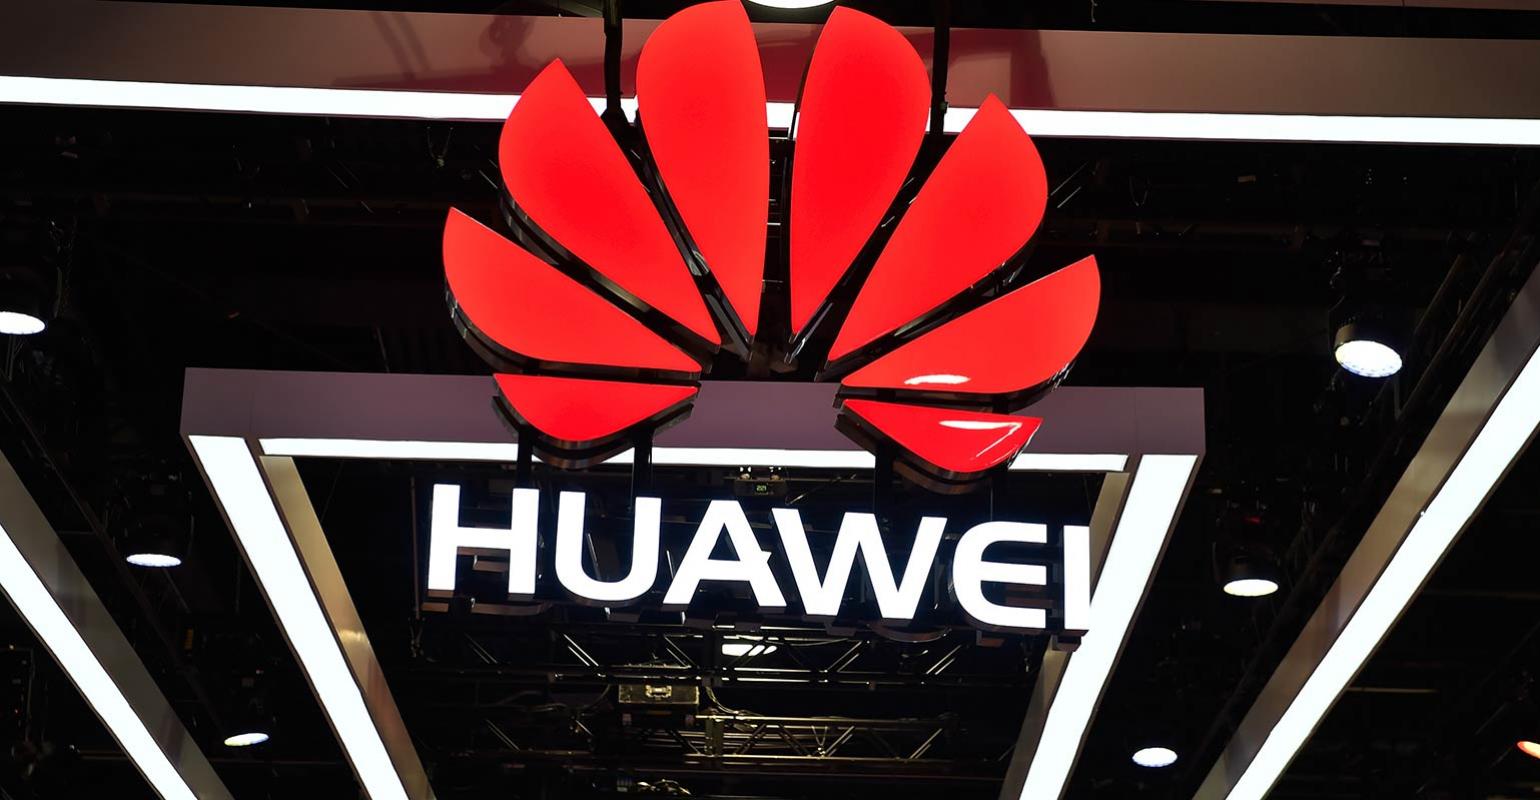 Huawei invests in lithography aims to advance in complete chip industry chain